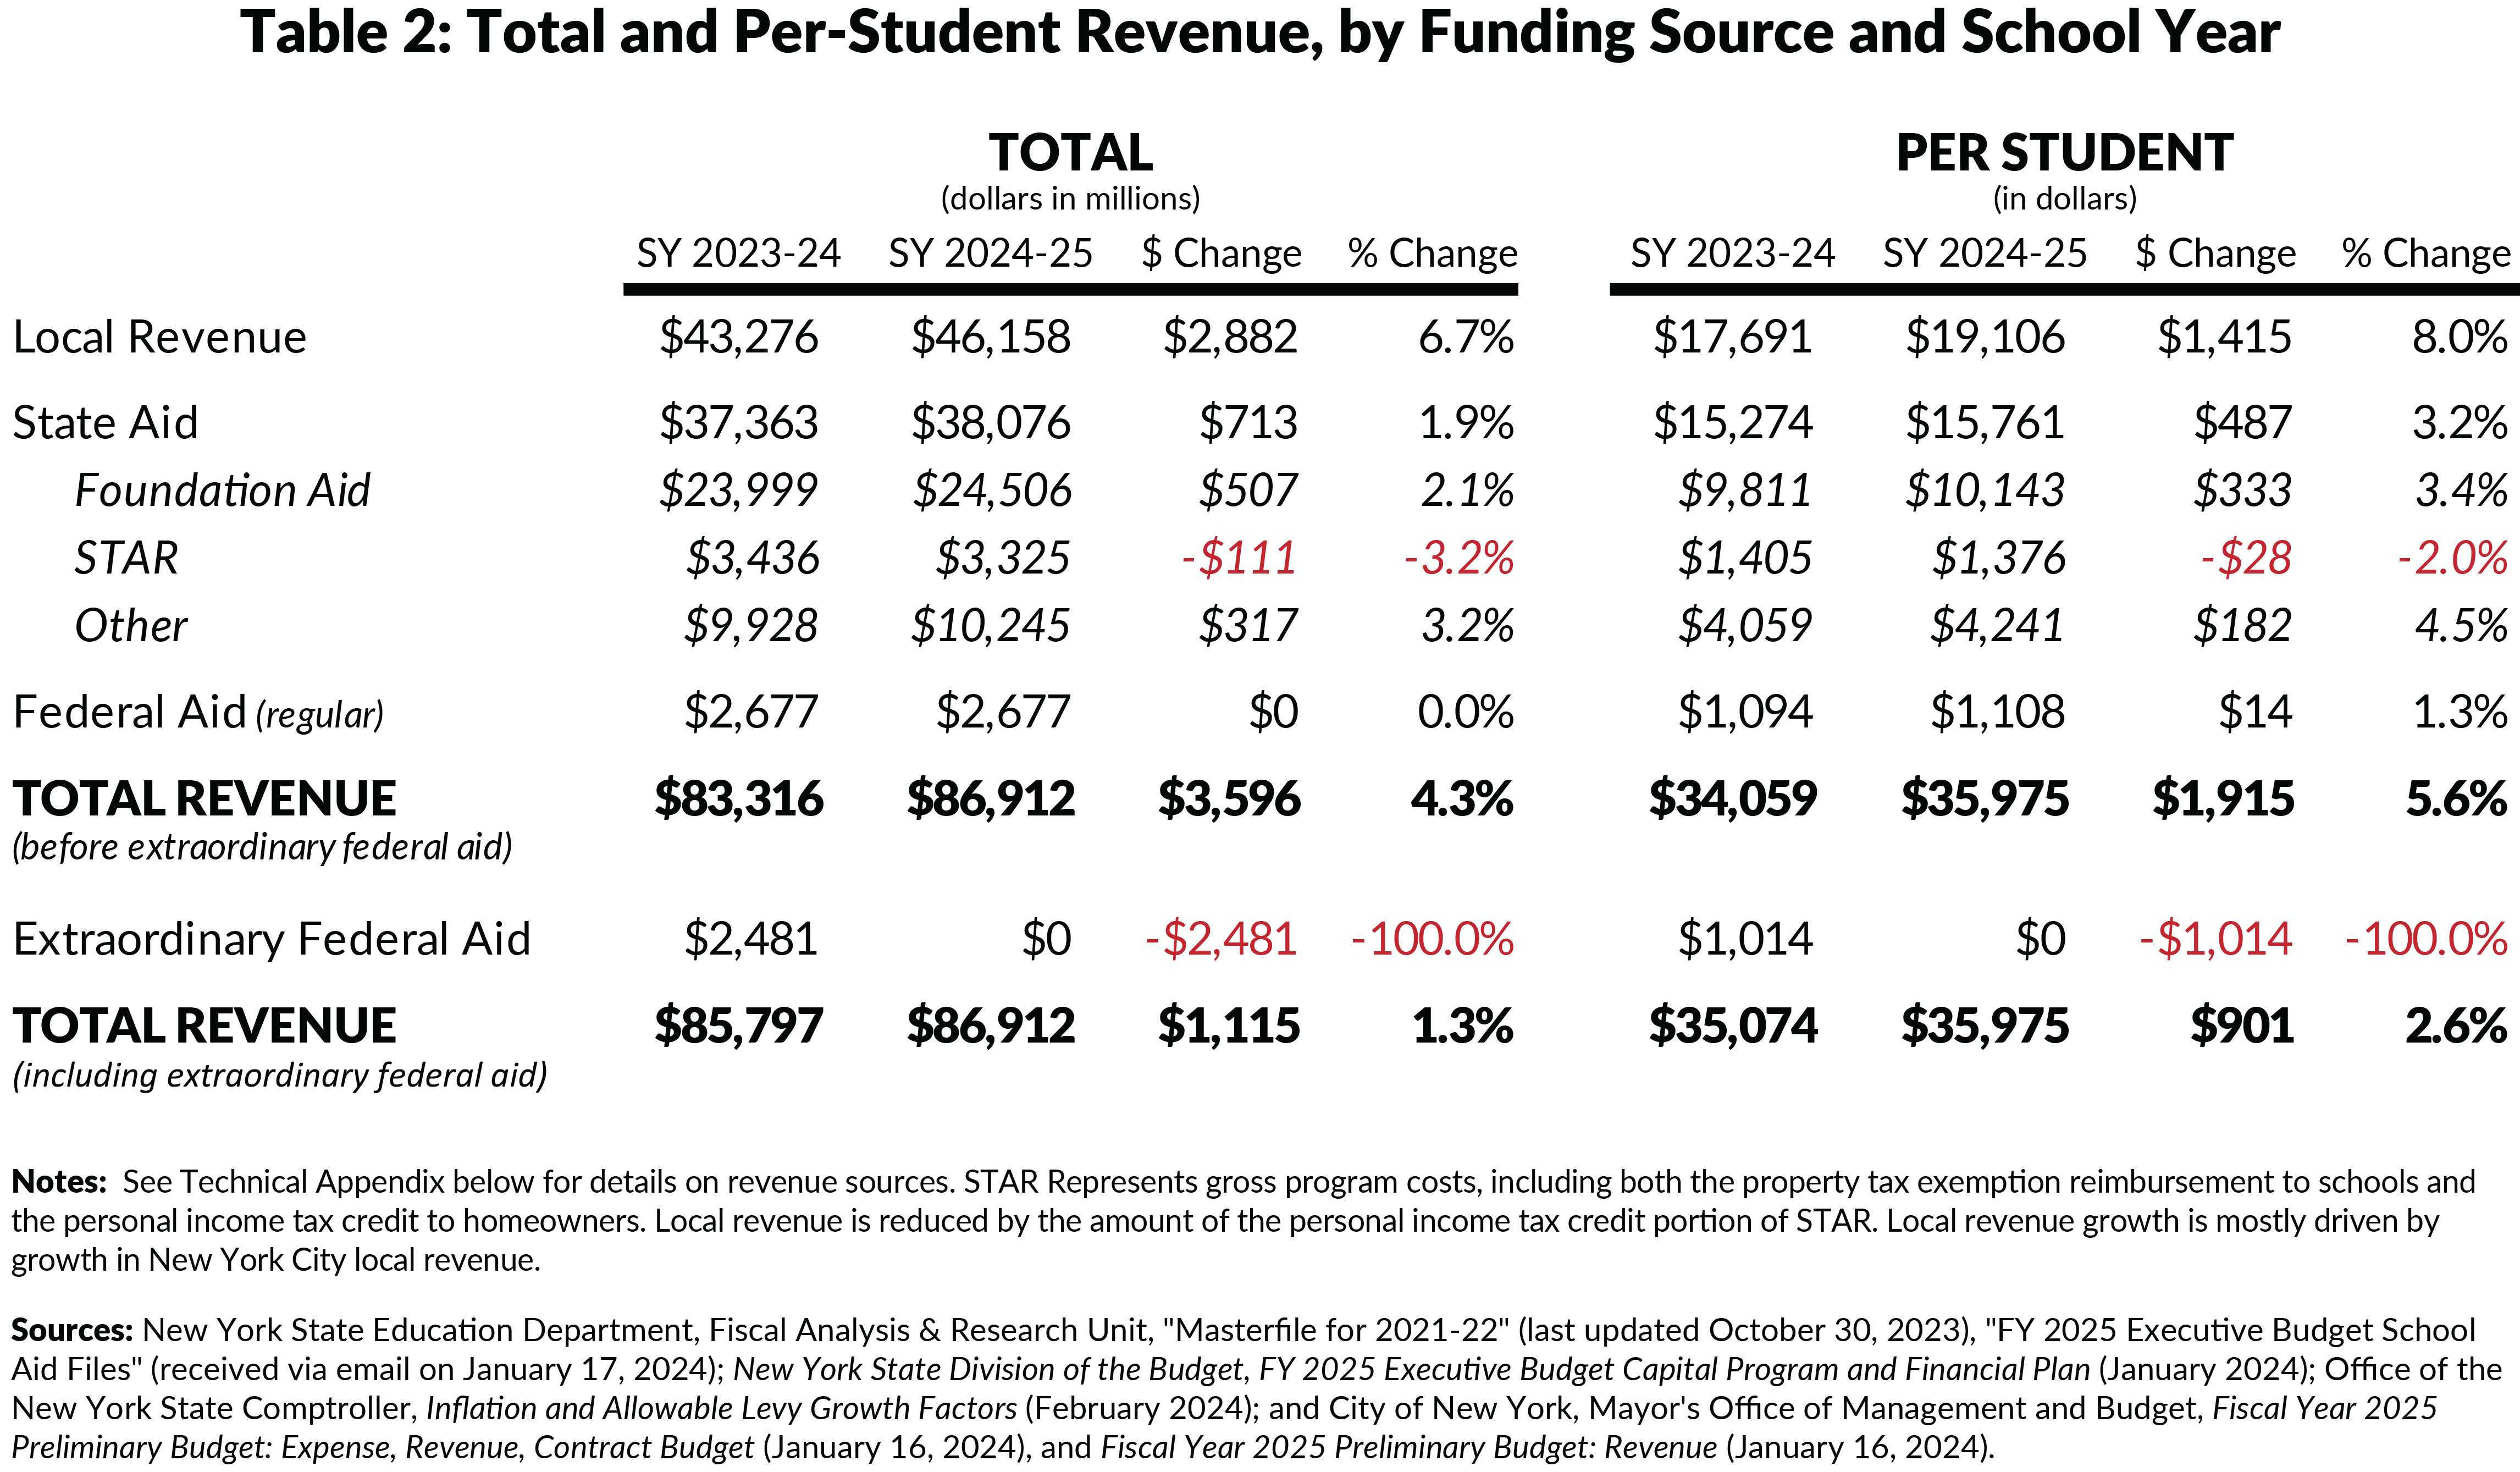 Table 2: Total and Per-Student Revenue, by Funding Source and School Year